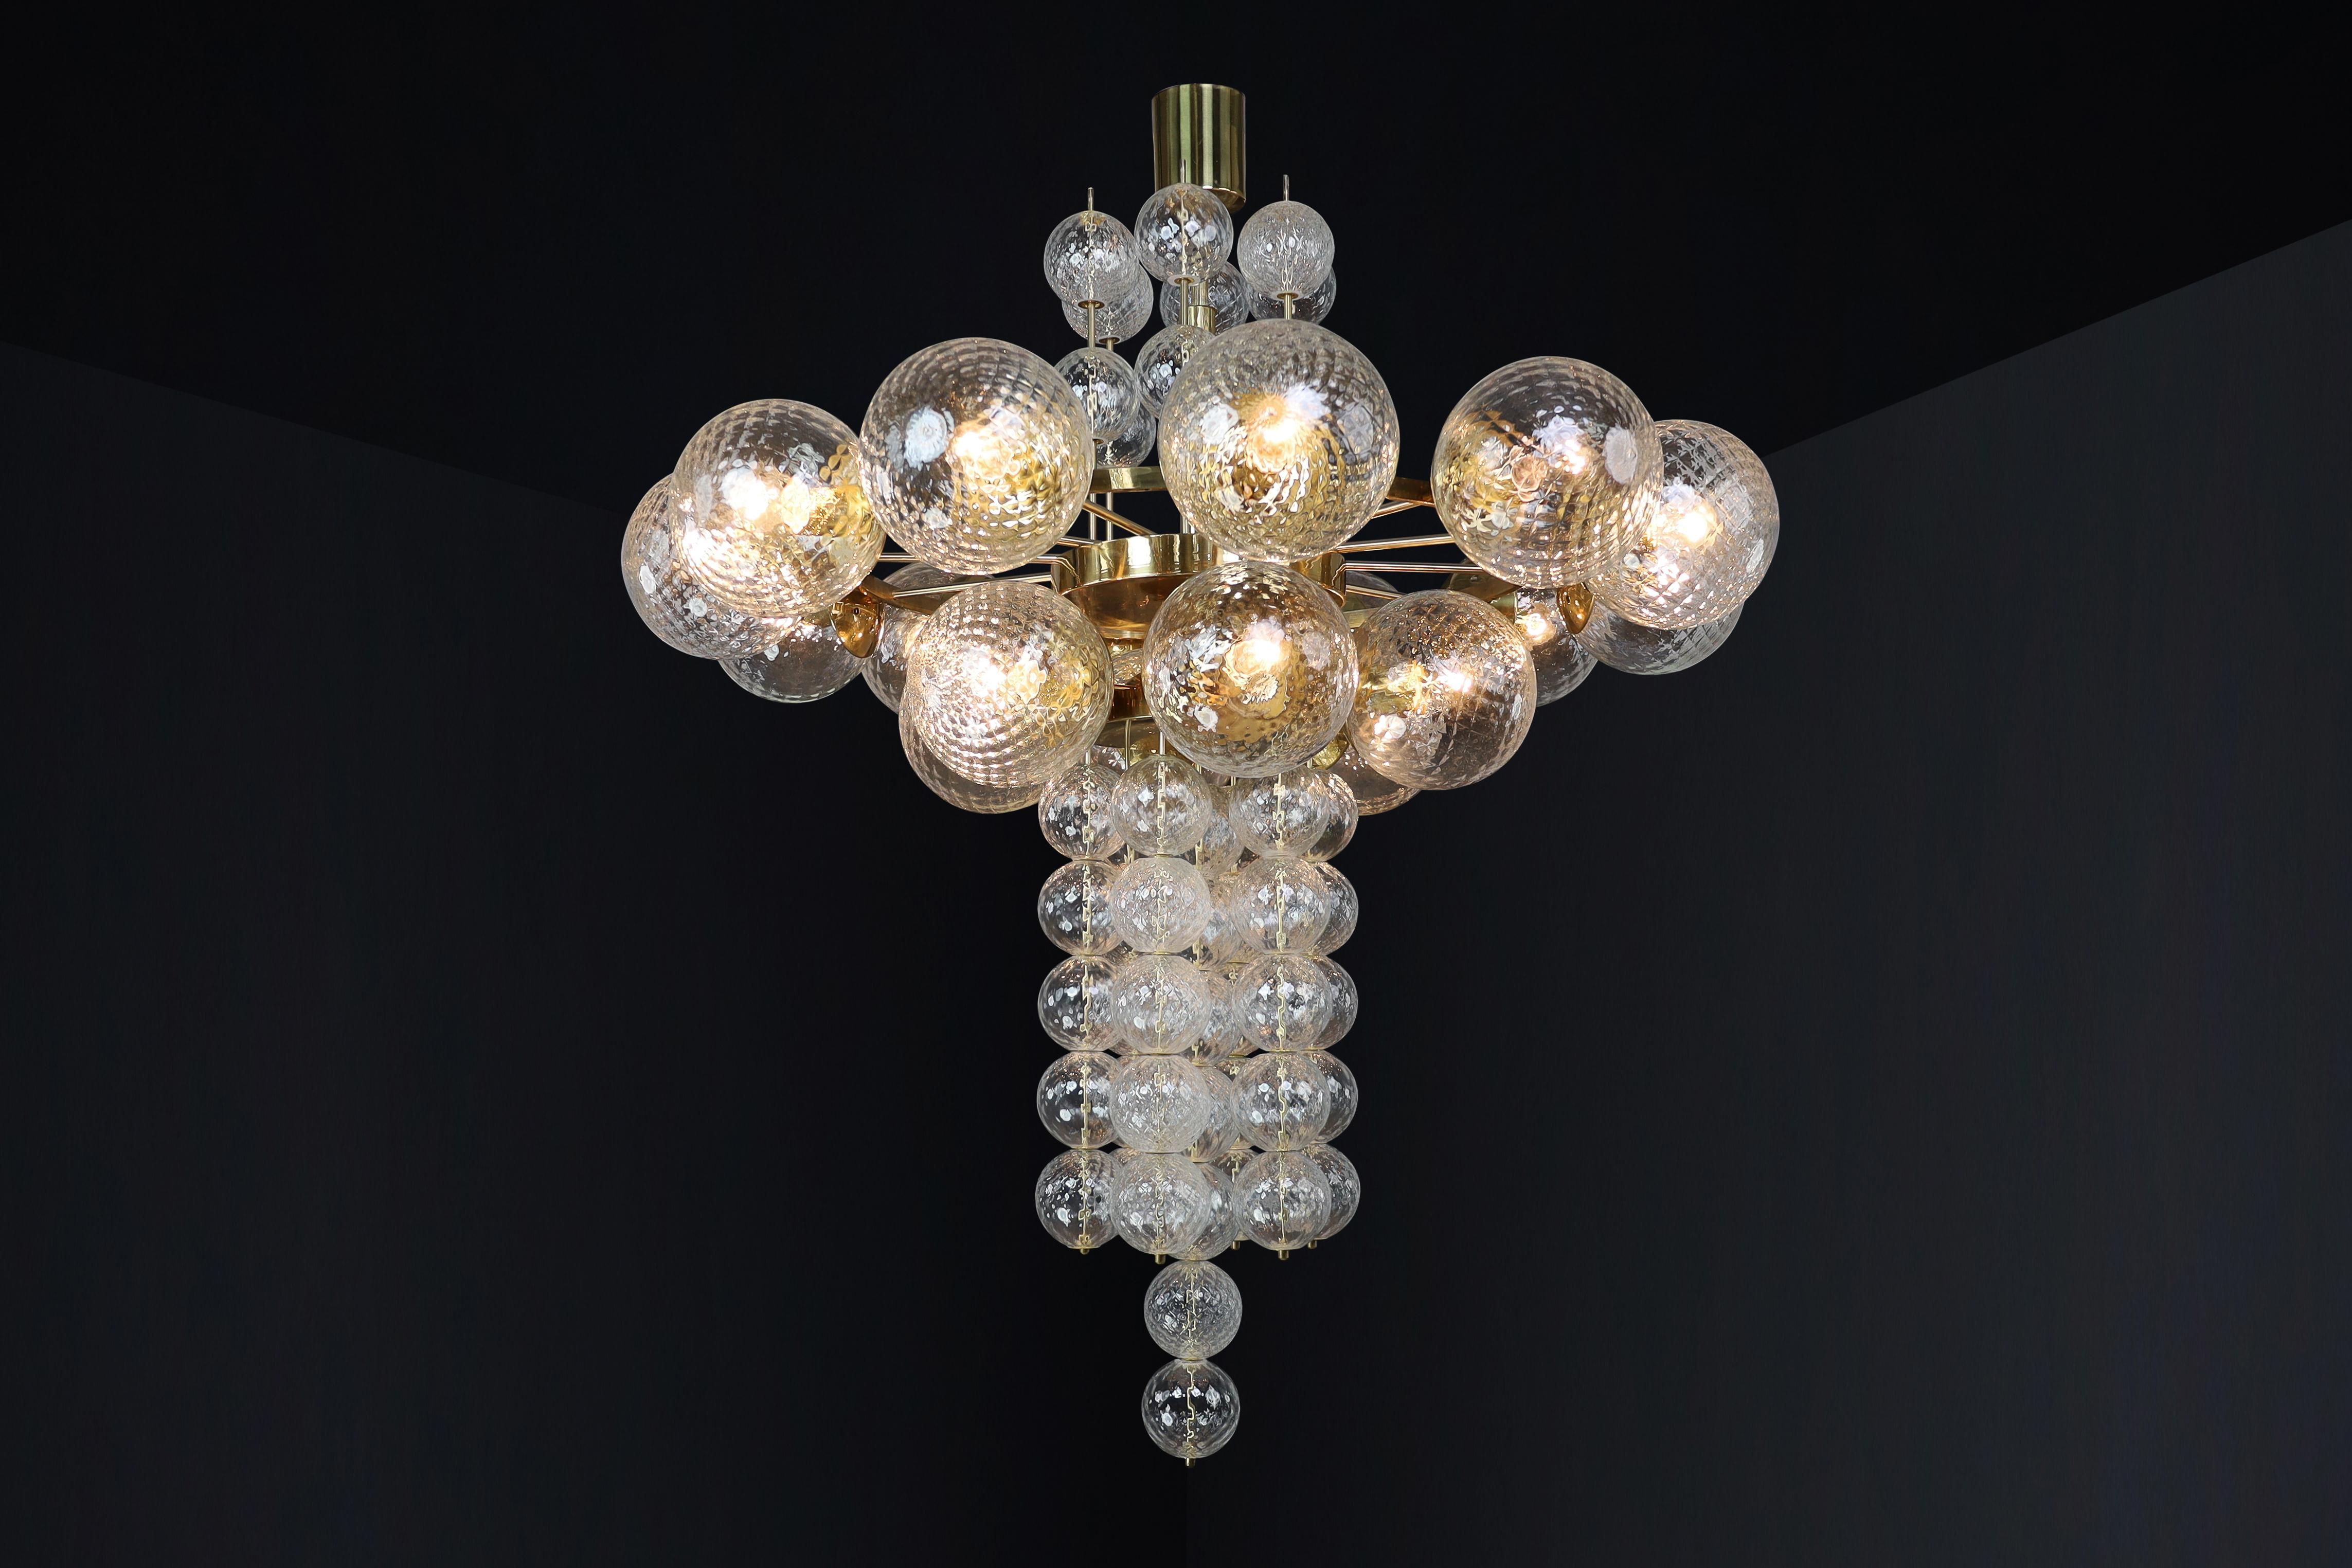 Large Chandelier with brass fixture and hand-blowed glass globes by Preciosa Cz. For Sale 4